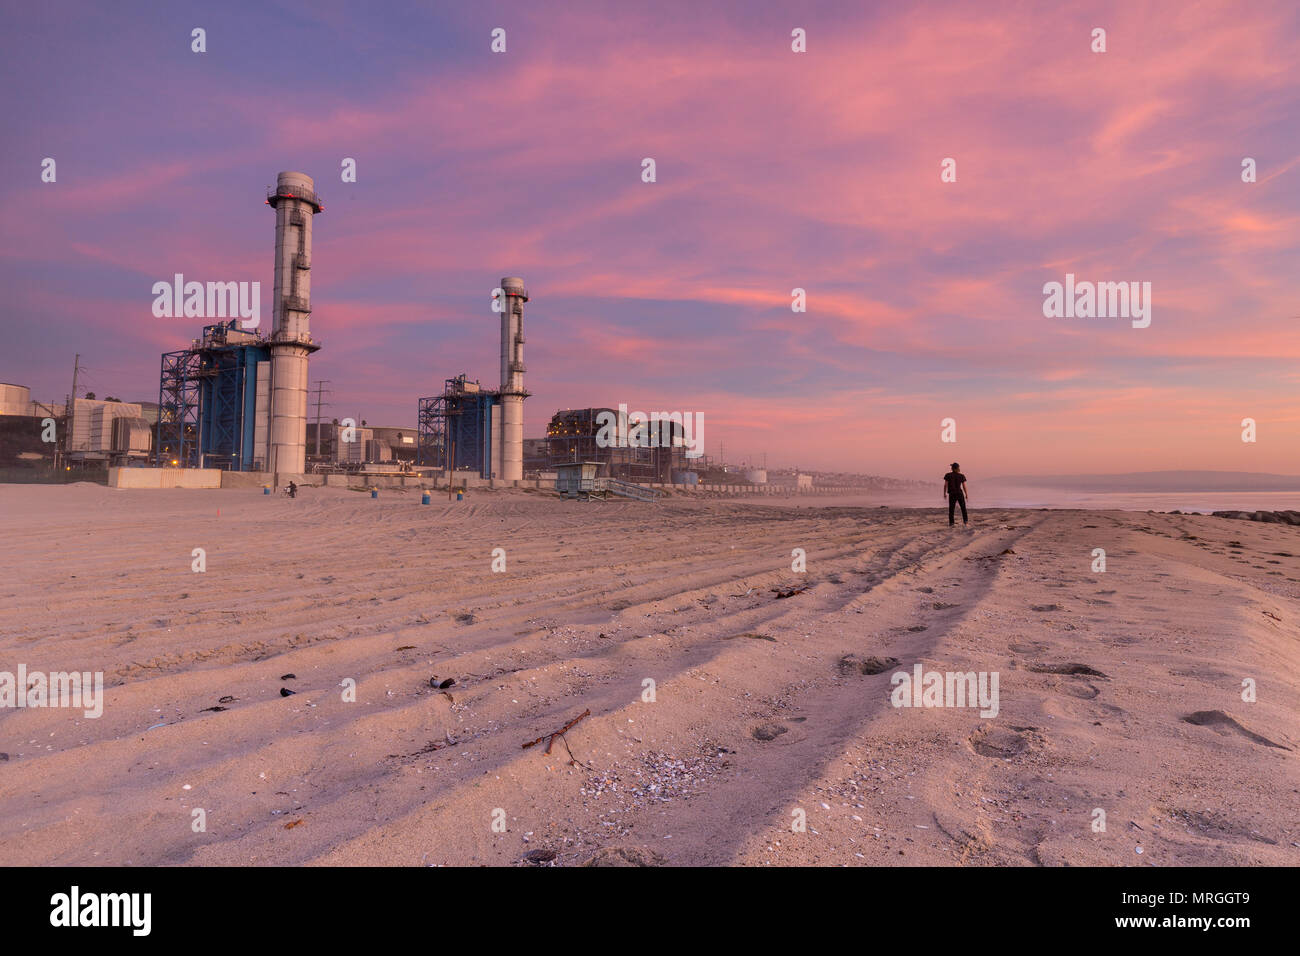 A stands on the sand dwarfed by the NRG Energy plant at El Porto Beach in Los Angeles. Stock Photo